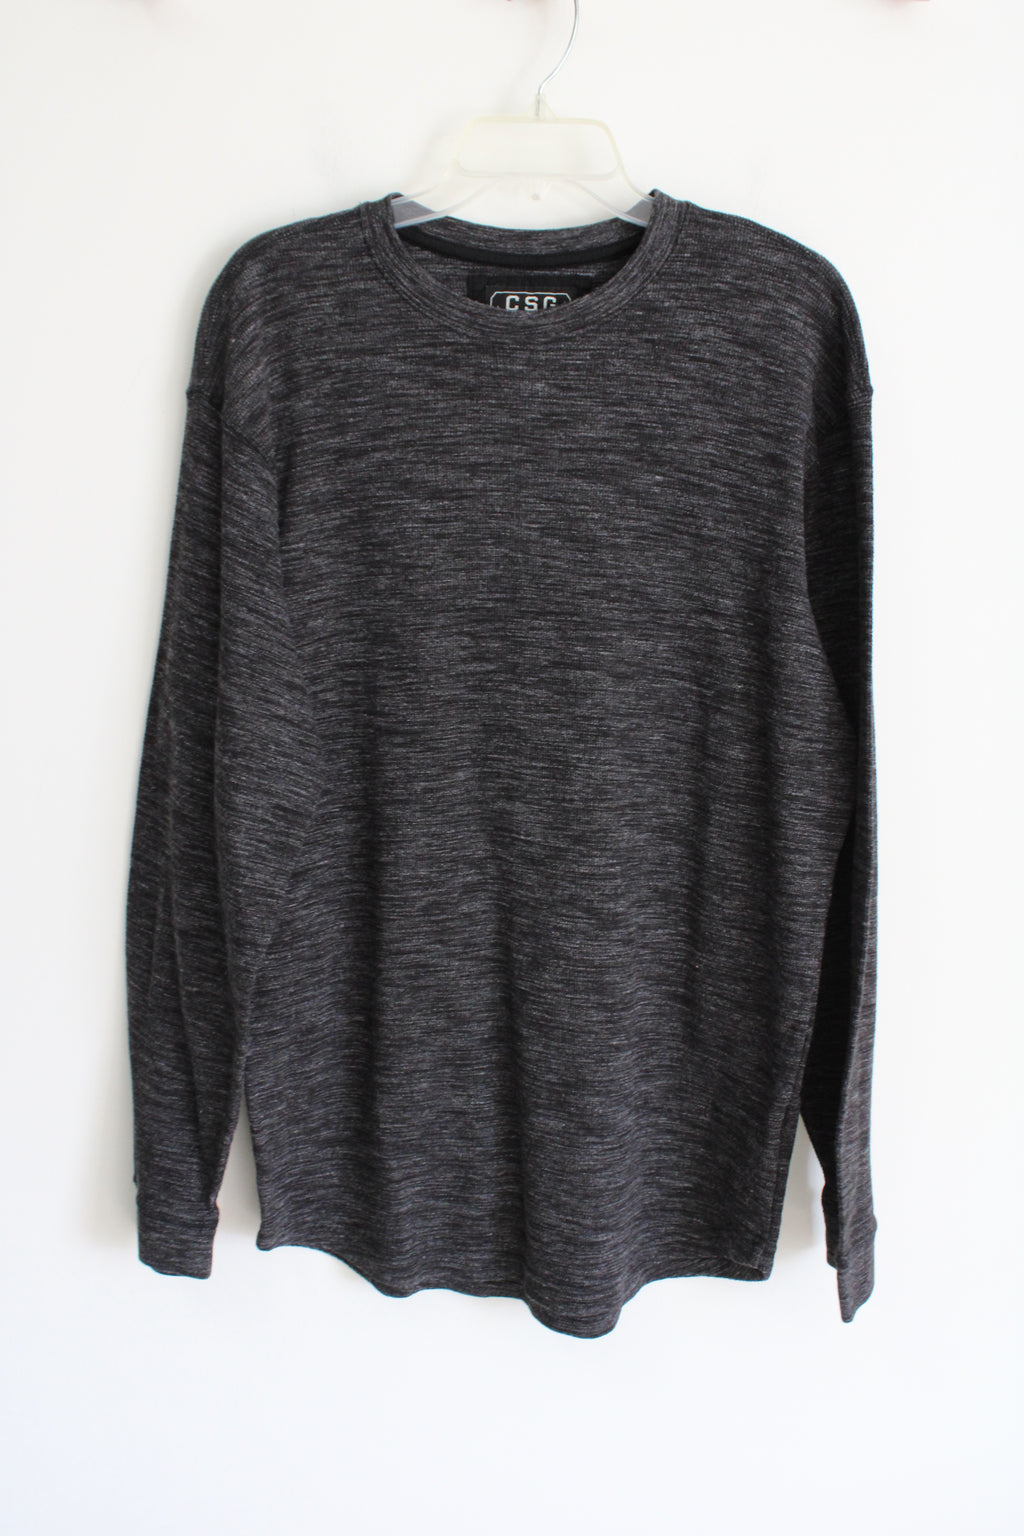 Champs Sports Gear Gray Heathered Long Sleeved Shirt | XL